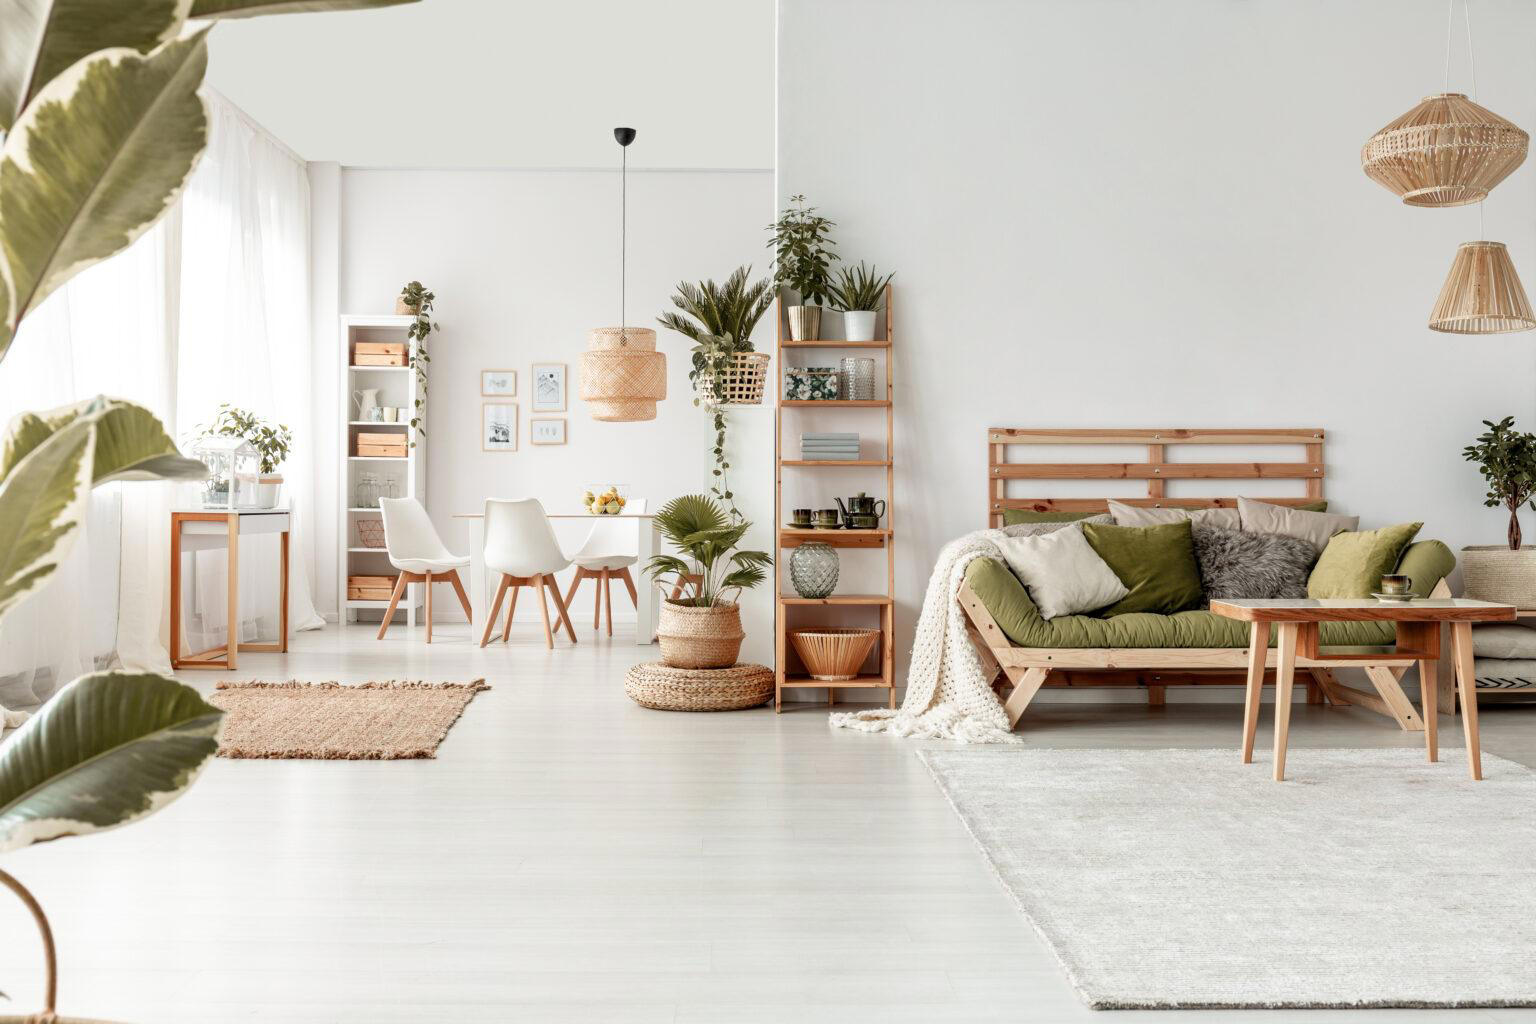 Scandinavian Style Focuses On Minimalism And Simplicity, So Here Are A ...